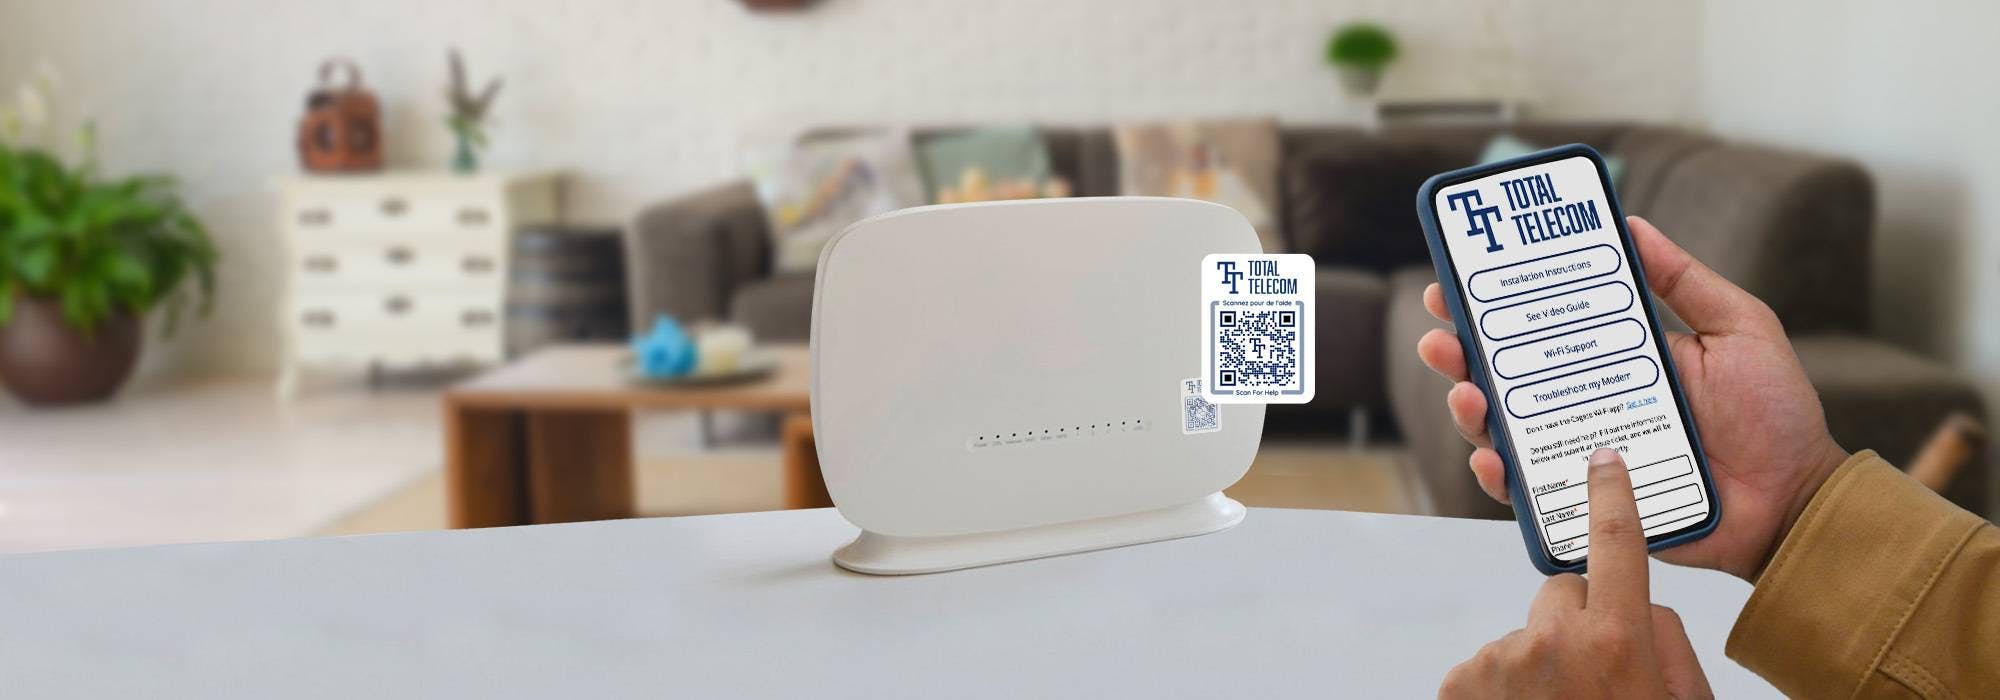 A person scanning a QR code on a router